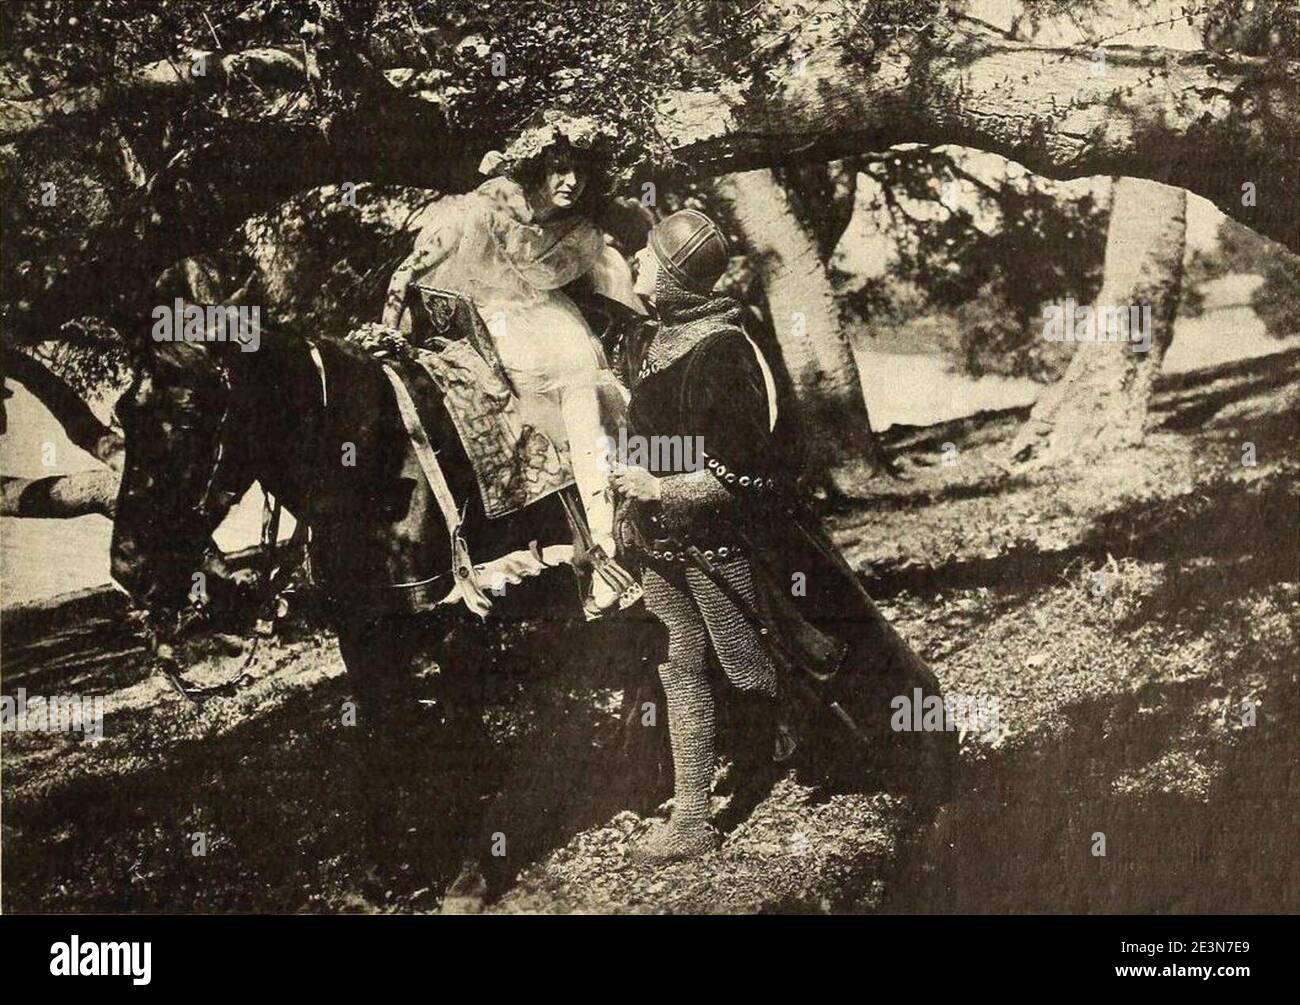 Still from the American film The Poet of the Peaks (1915) with Vivian Rich and David Lythgoe. The caption notes that the film is based upon John Keat's poem 'La Belle Dame sans Merci.' On page 5 of the April 3, 1915 Reel Life. Stock Photo